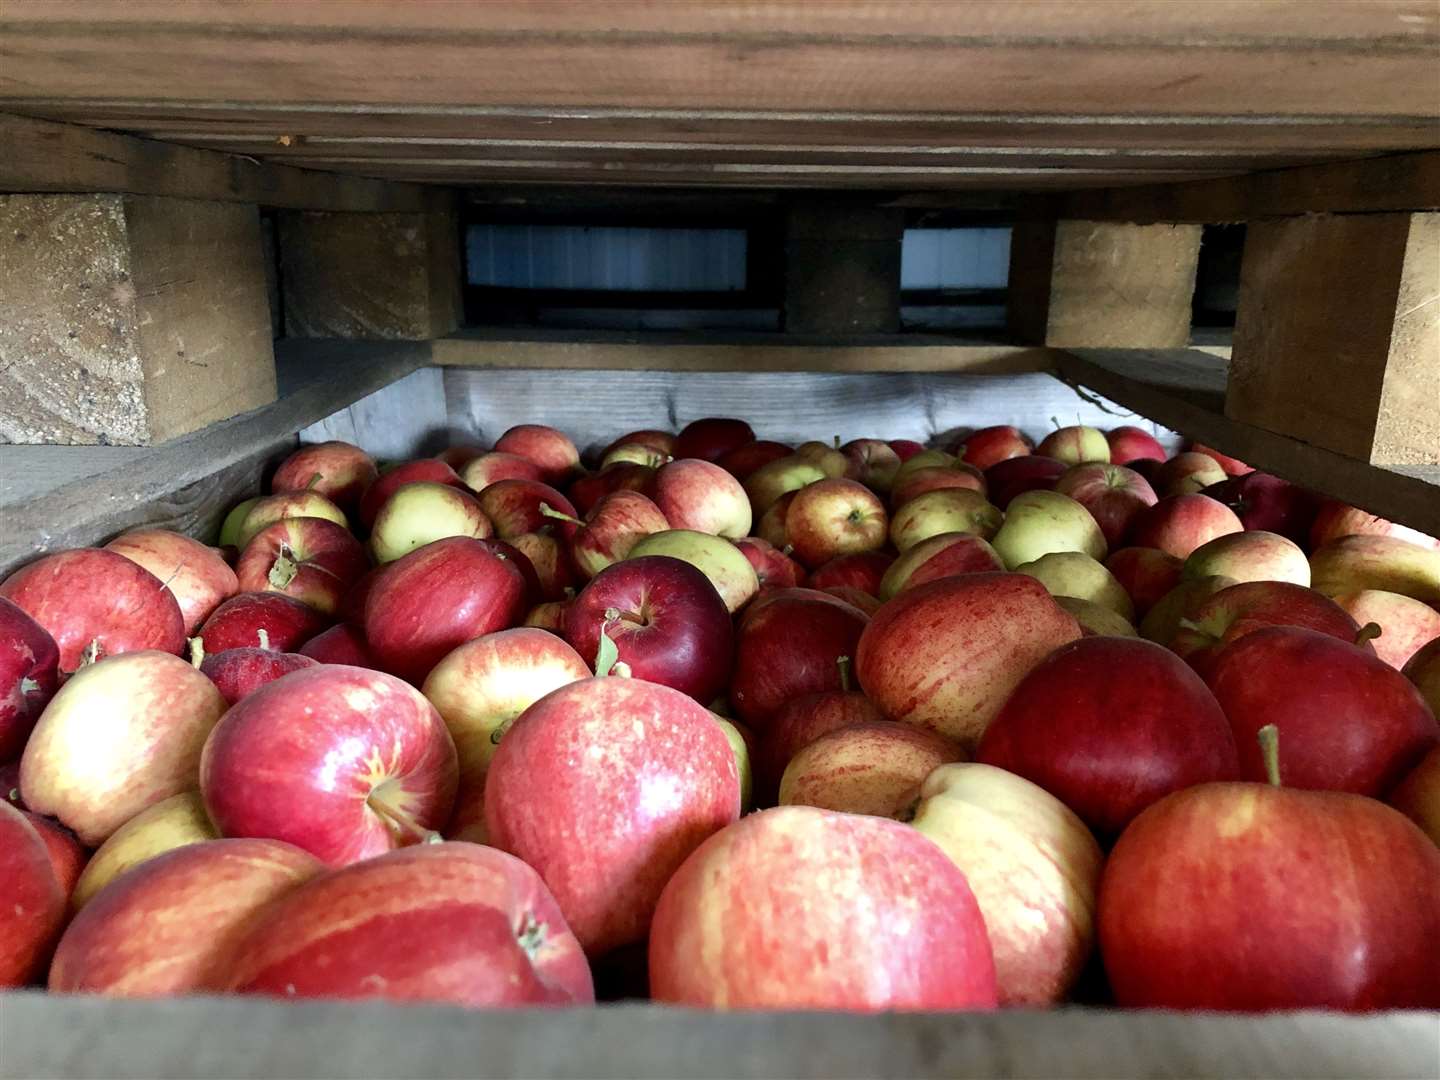 AC Goatham based at Flanders Farm, Hoo, near Rochester, grows a third of the apples and pears sold in the UK